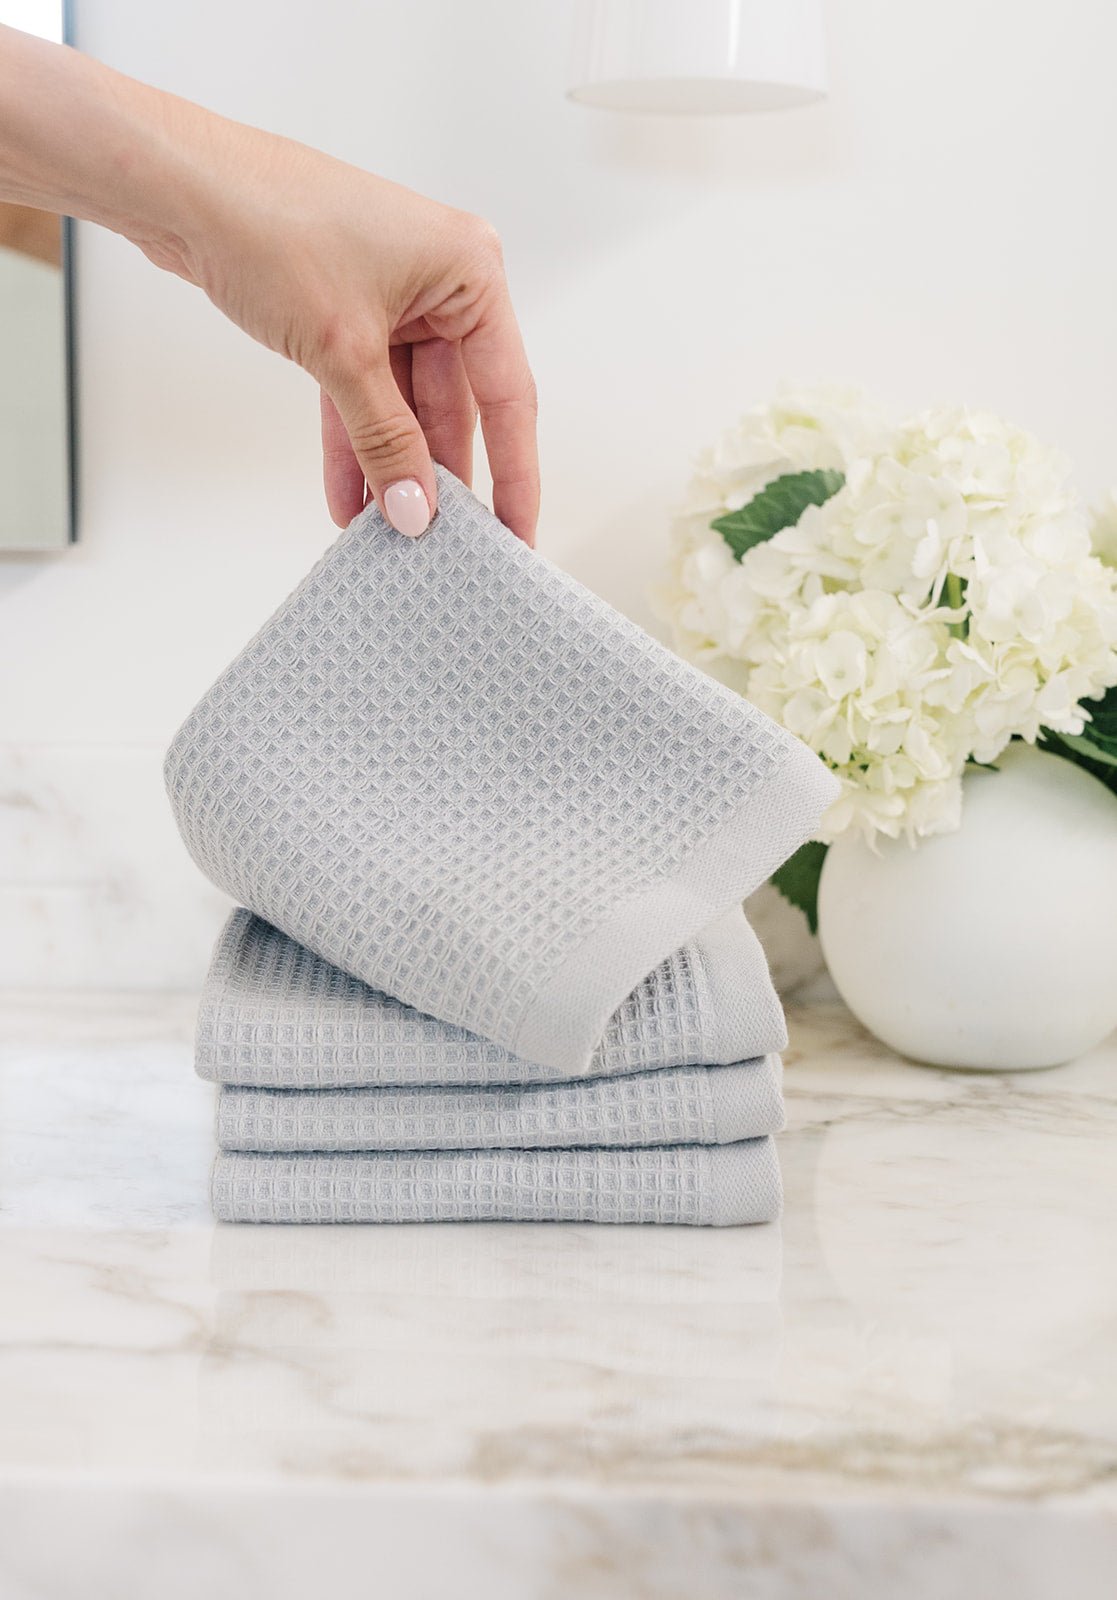 Harbor Mist Waffle Wash Cloths neatly folded. The photo was taken with a hand pulling one of the waffle cloths from the set. The cloths rest on a white marble sink |Color:Harbor Mist